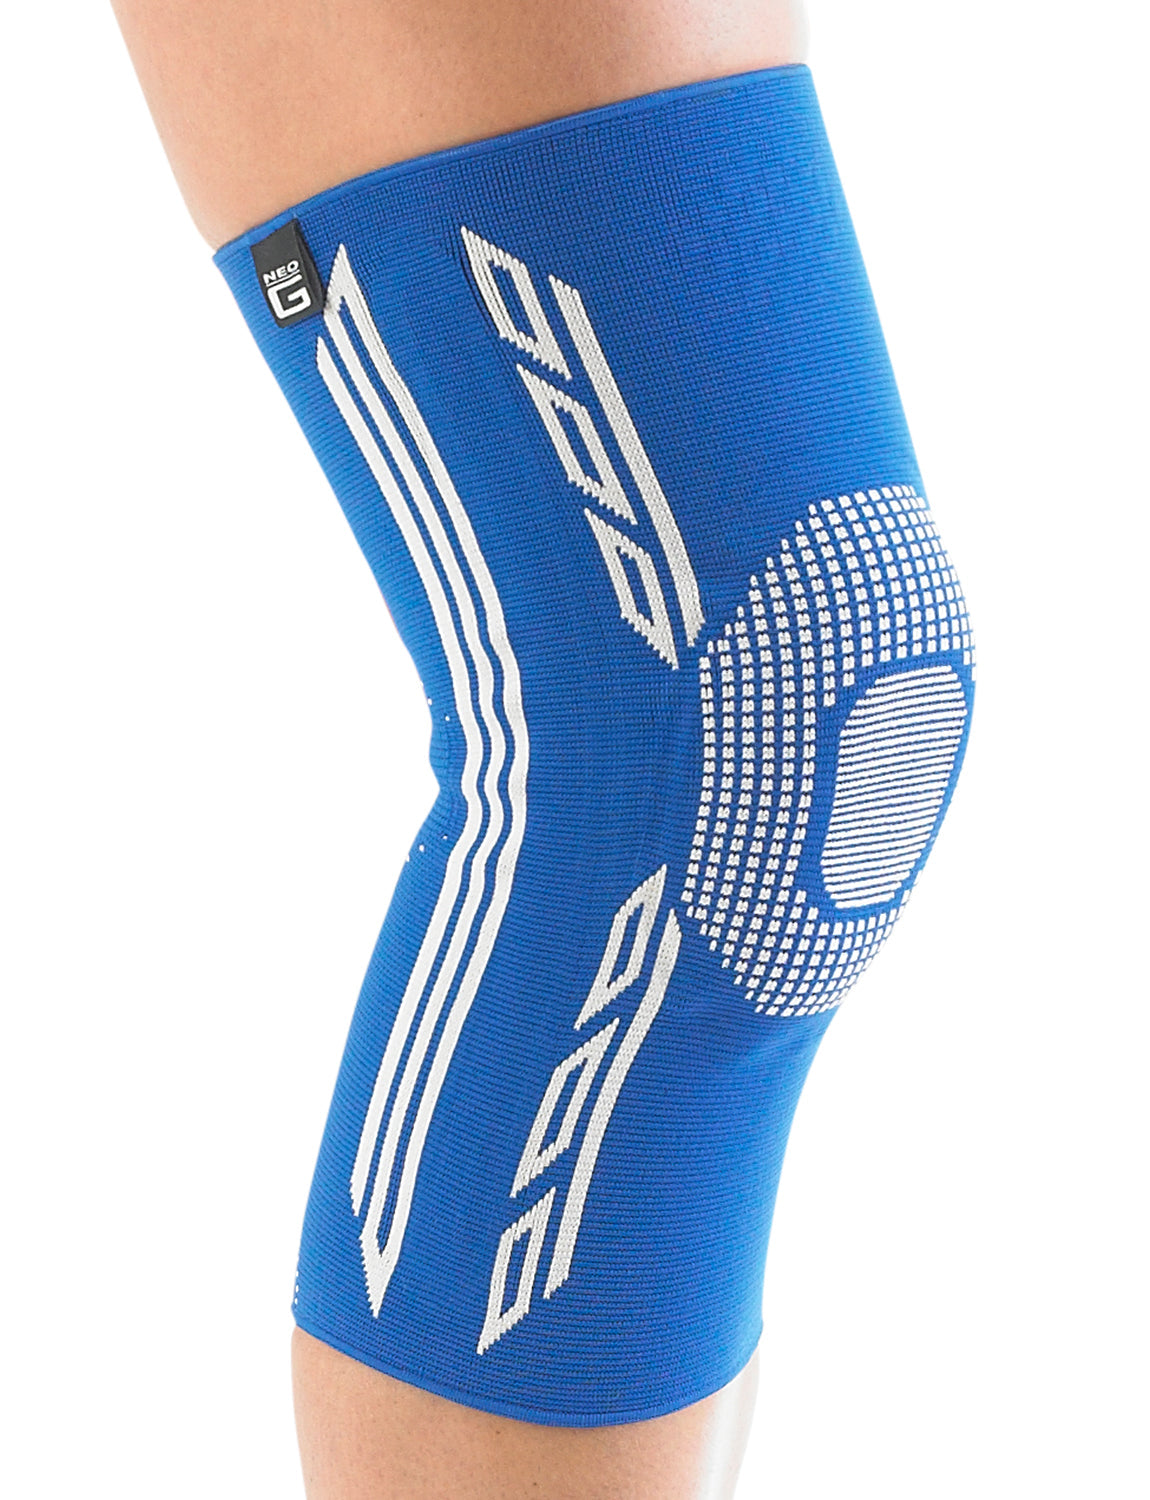 Top Knee Support With Silicone Patella Pad & Flexible Side Stays